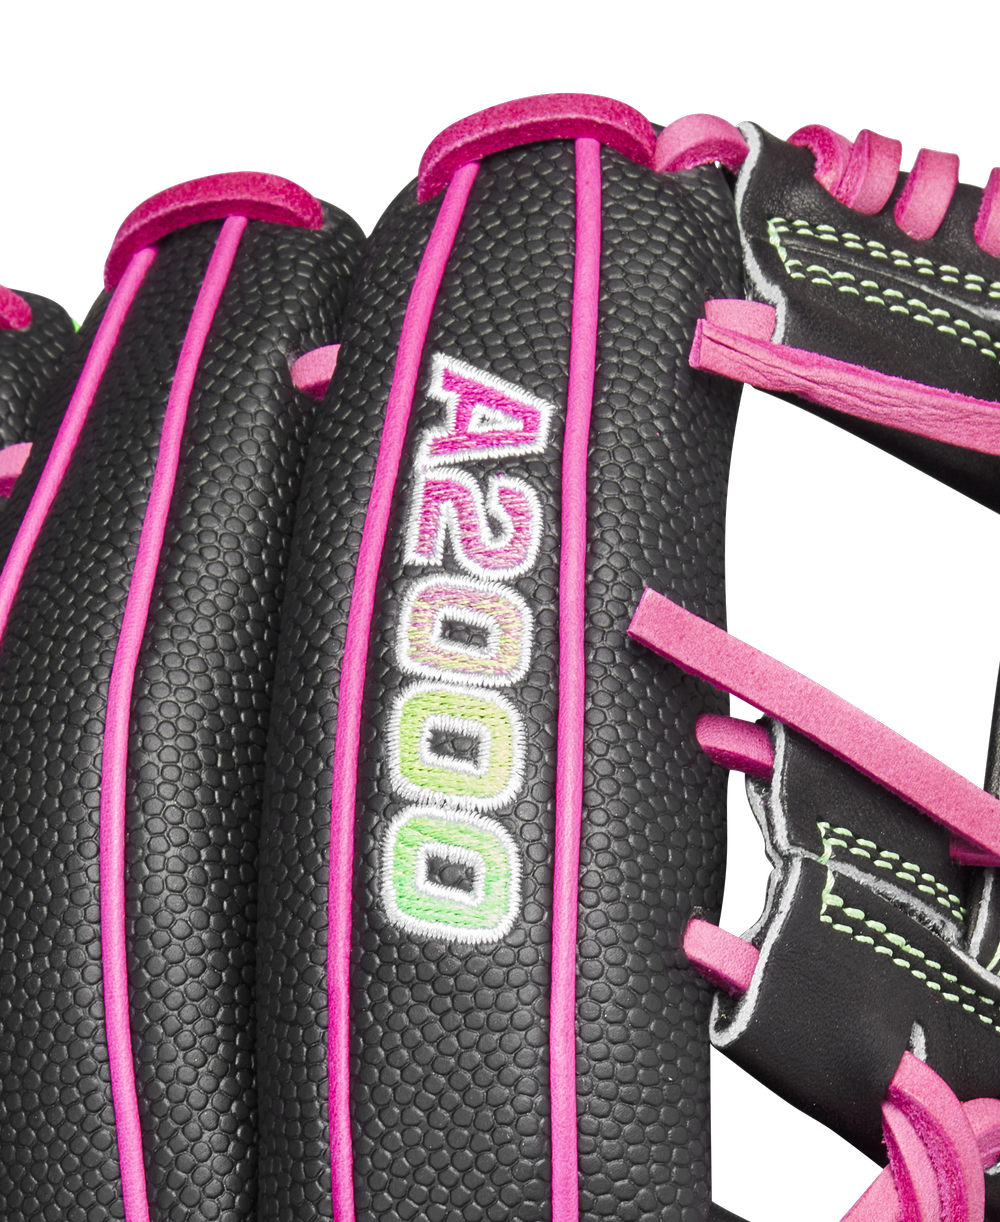 Wilson A2000 October 2021 Glove of the Month Jake Cronenworth G5 Limited  Edition 11.75 — Baseball 365